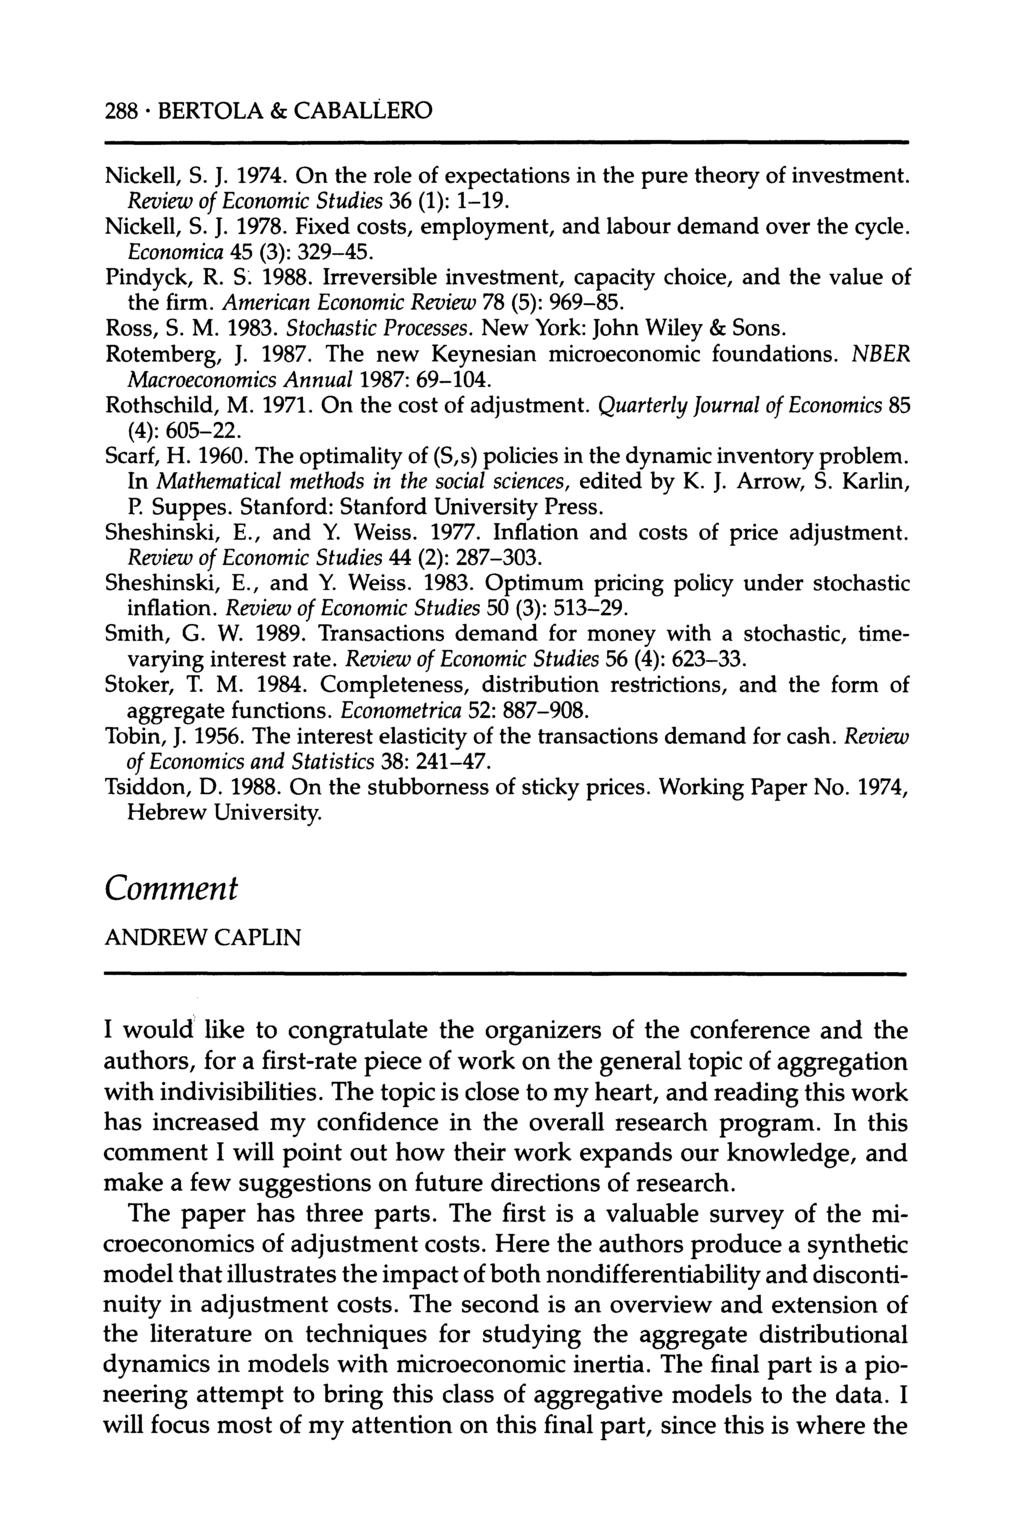 288 - BERTOLA & CABALLERO Nickell, S. J. 1974. On the role of expectations in the pure theory of investment. Review of Economic Studies 36 (1): 1-19. Nickell, S. J. 1978.